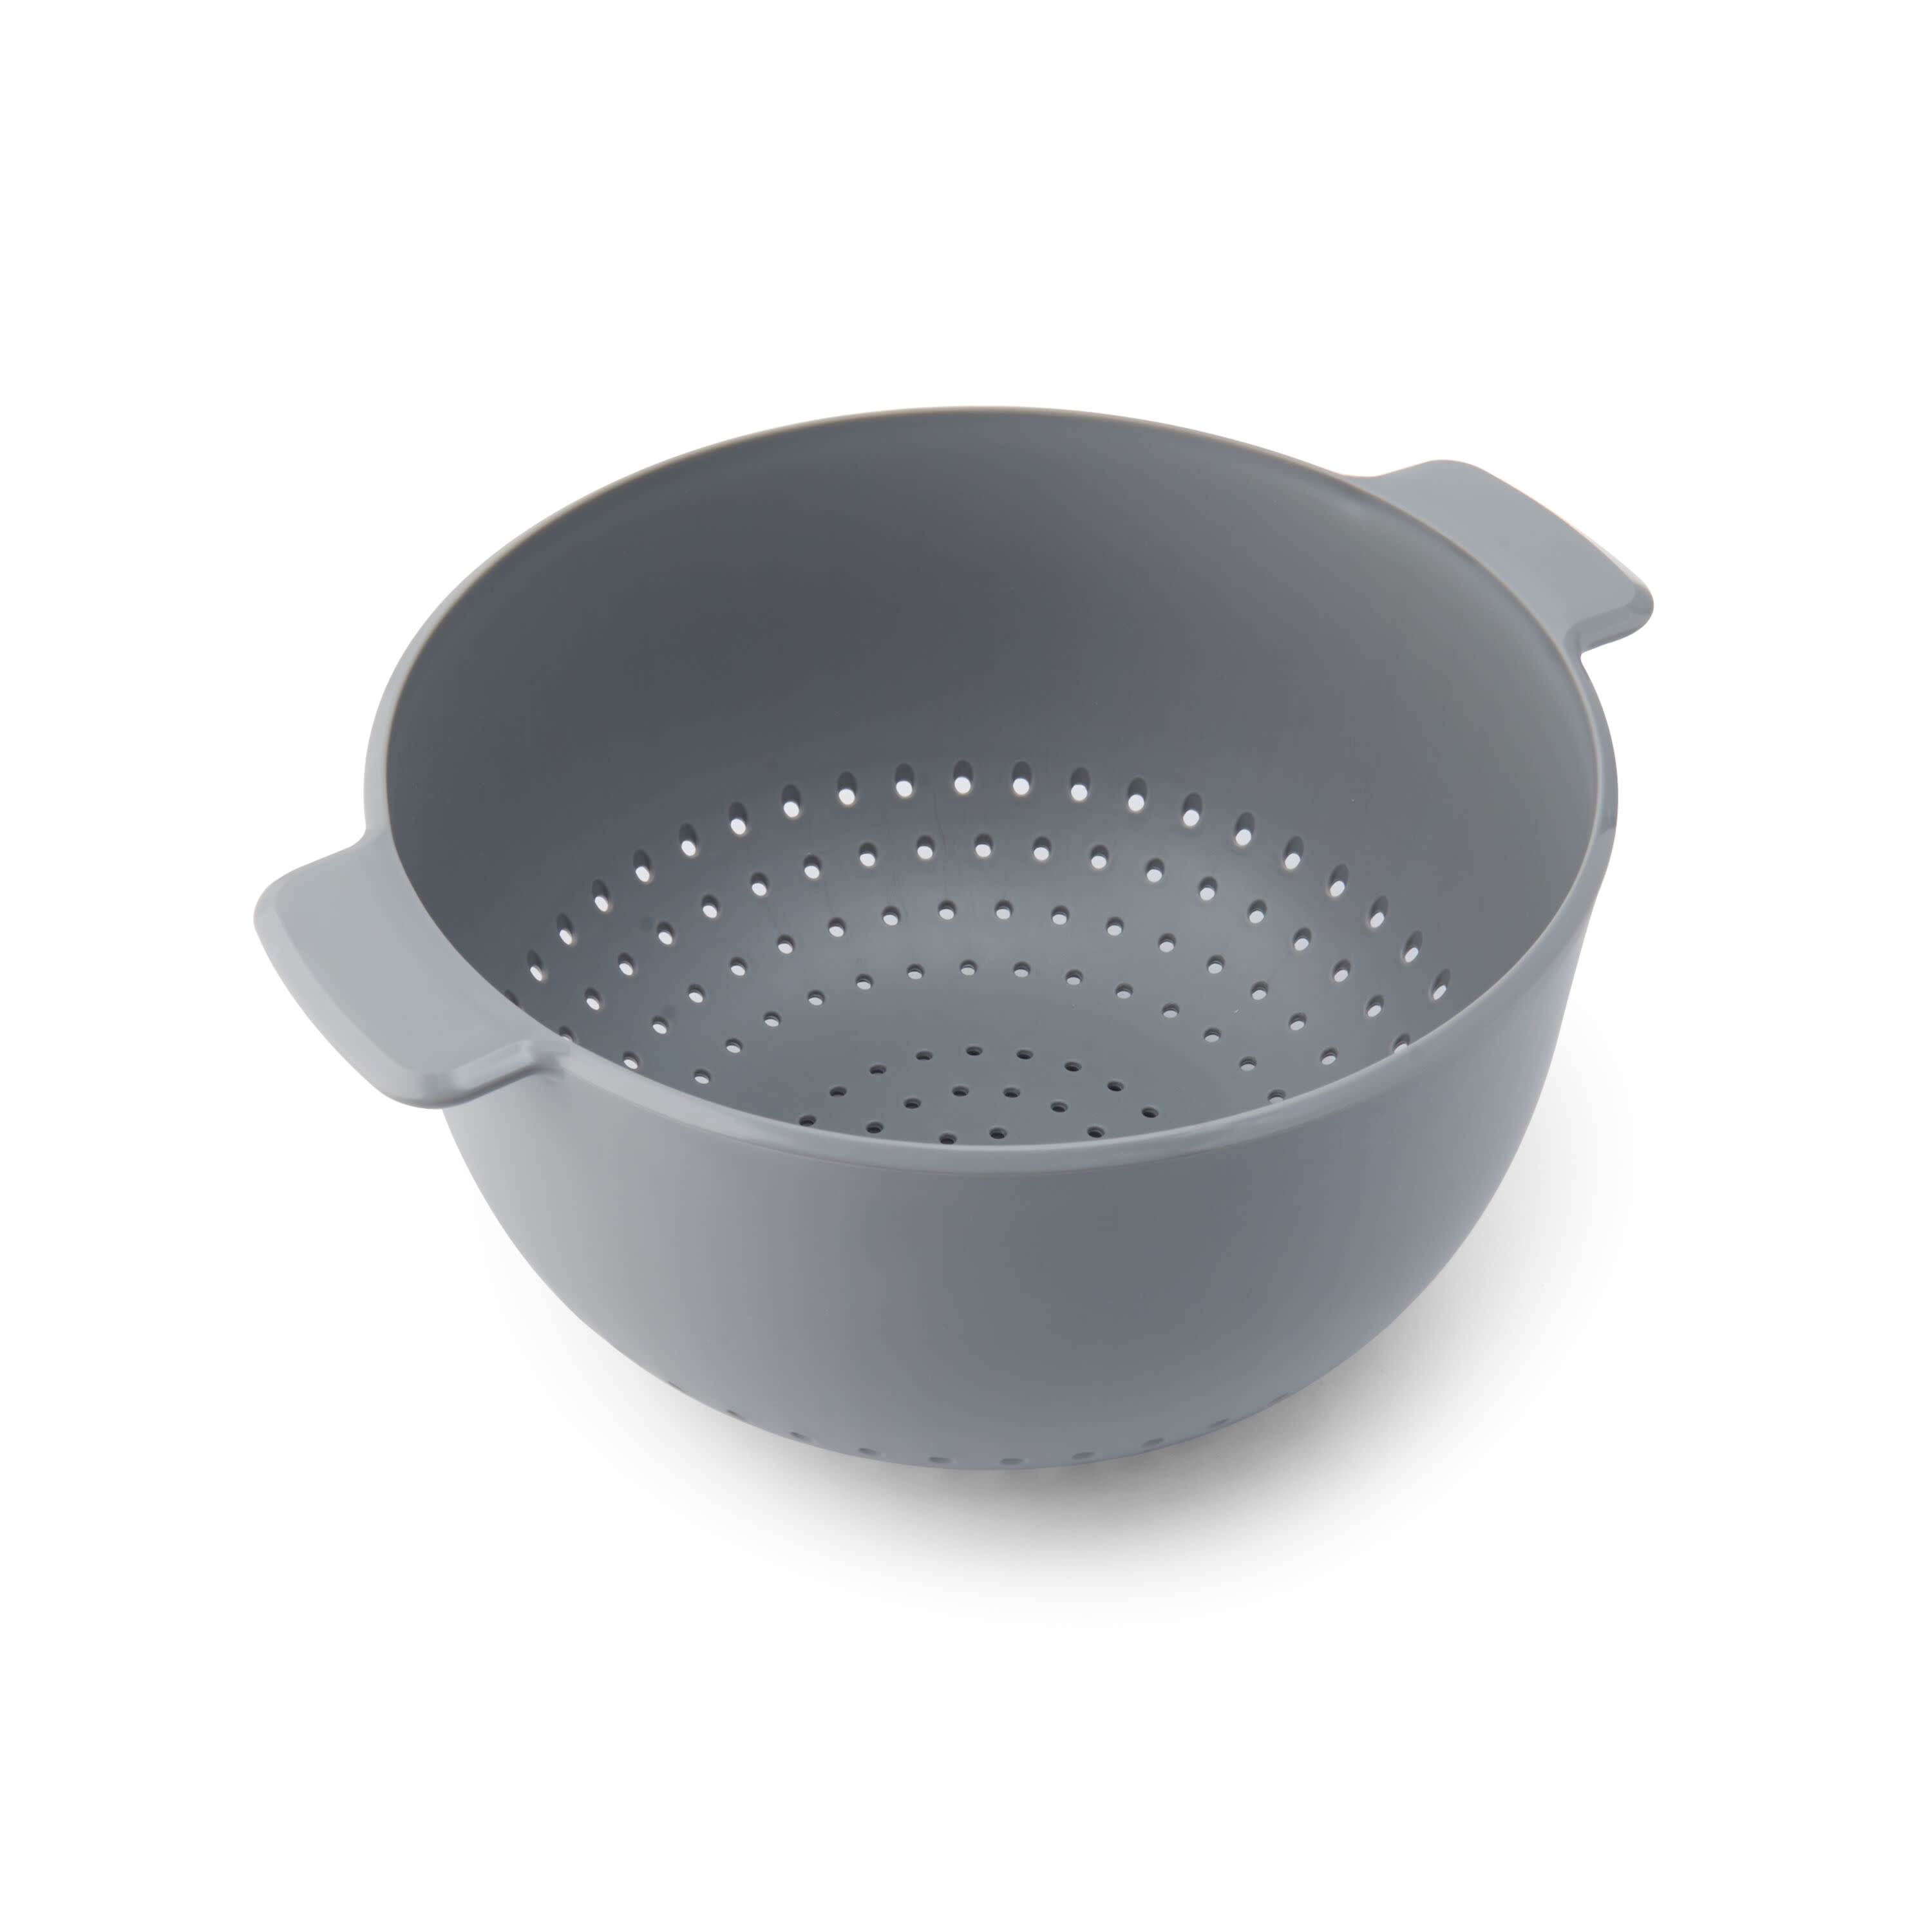 Beautiful 5-quart Colander with Integrated Handles, Store Only Item, Item  and Color May Vary by Location, 1 Colander by Drew Barrymore 